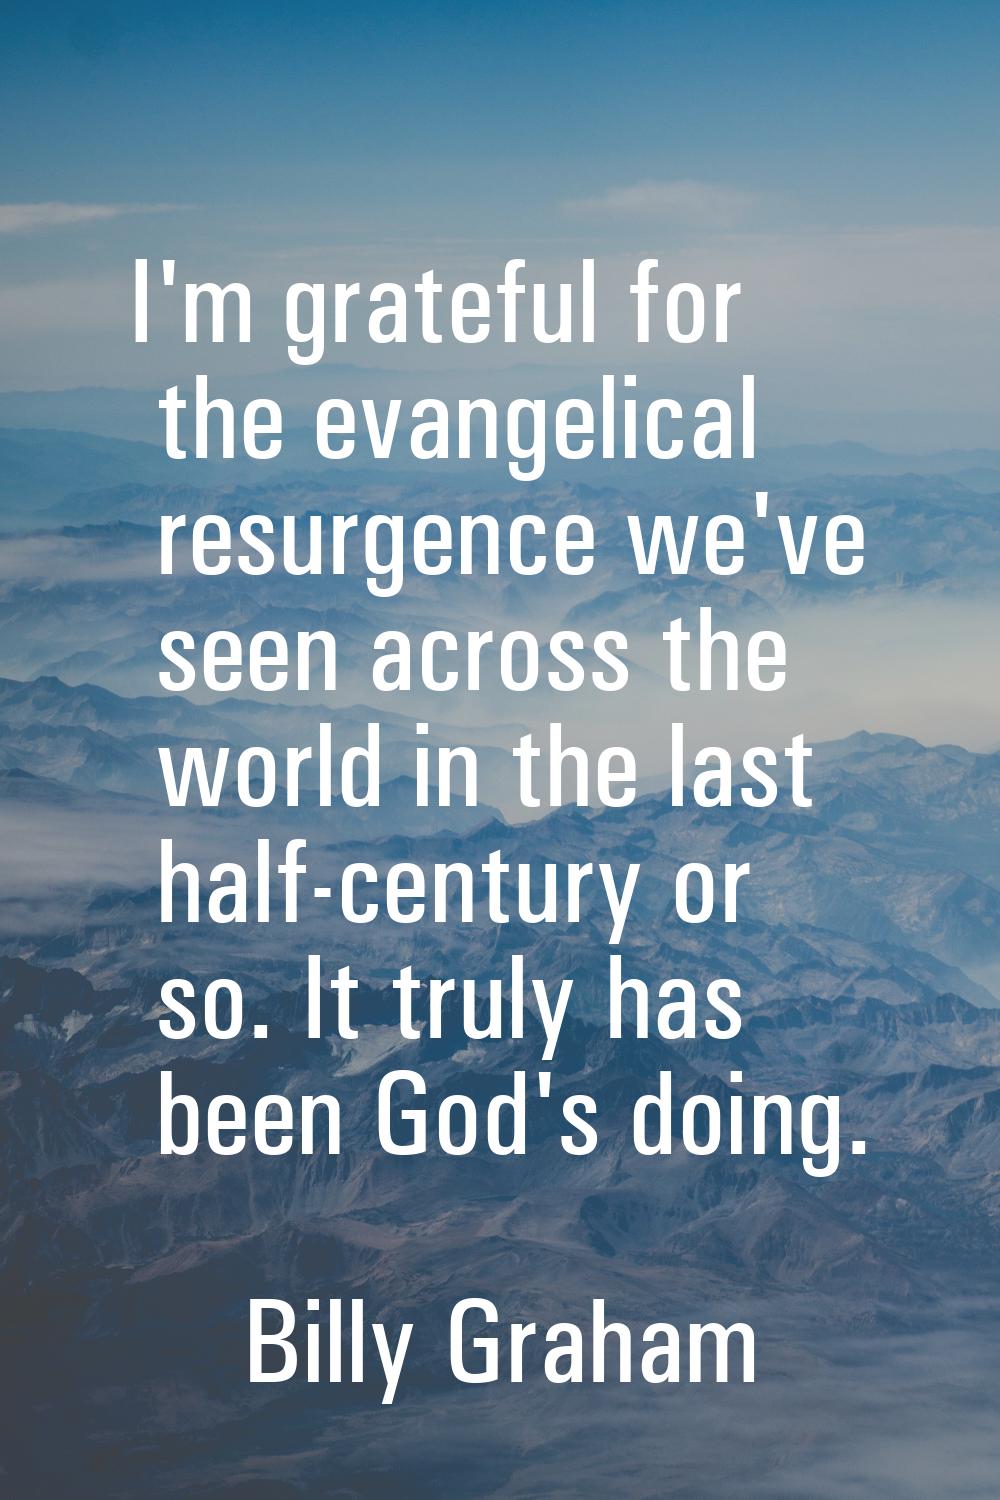 I'm grateful for the evangelical resurgence we've seen across the world in the last half-century or